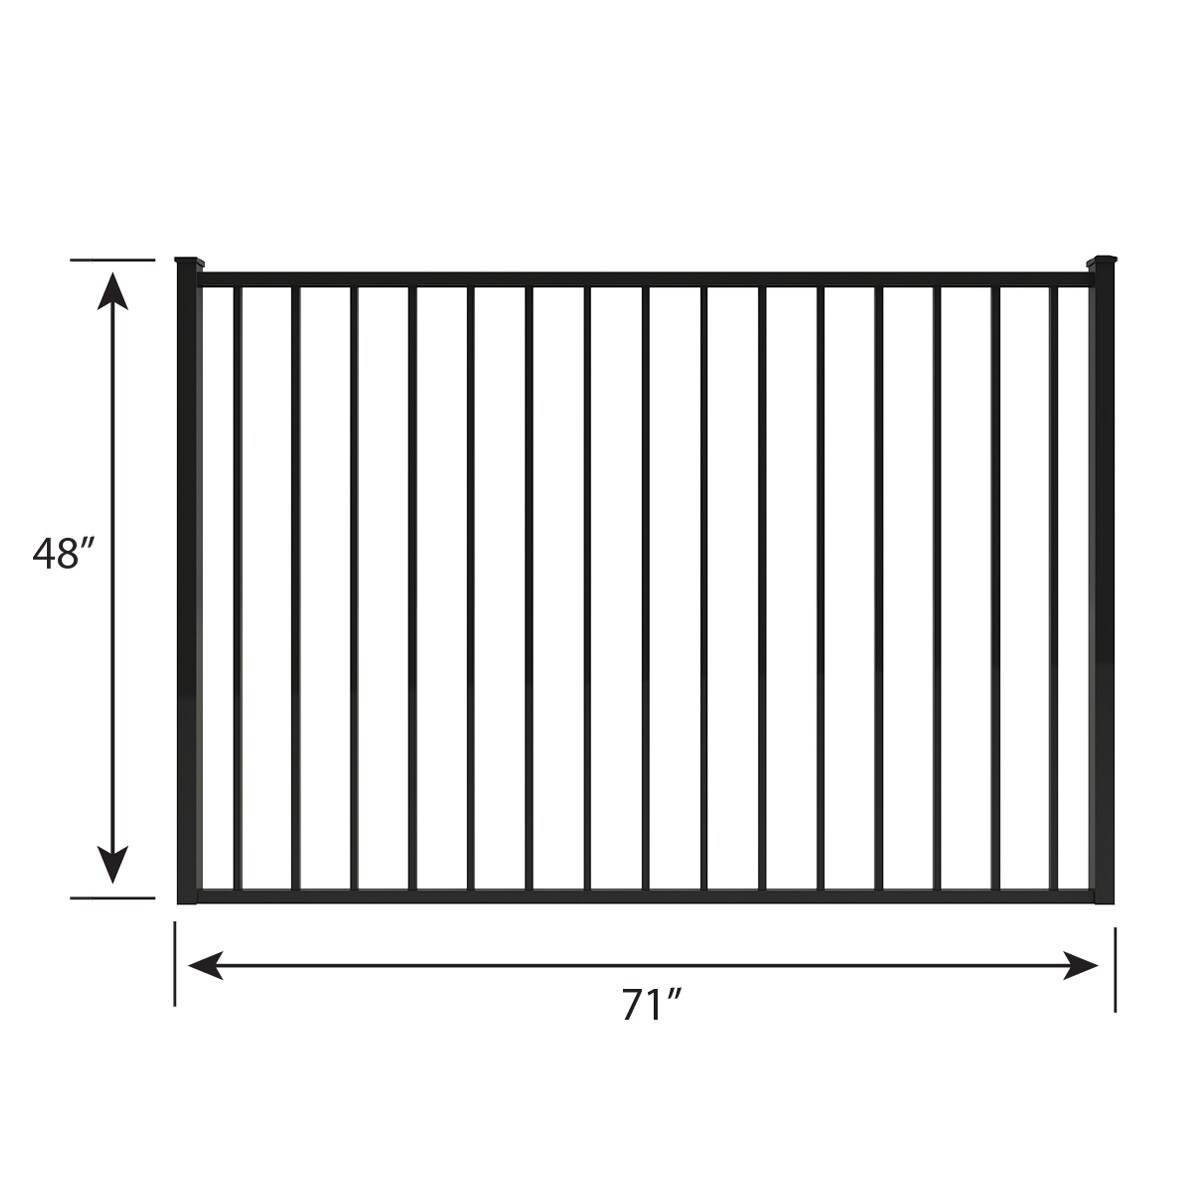 Ironcraft Orleans White Powder-coated Aluminum Yard Gate at Lowes.com